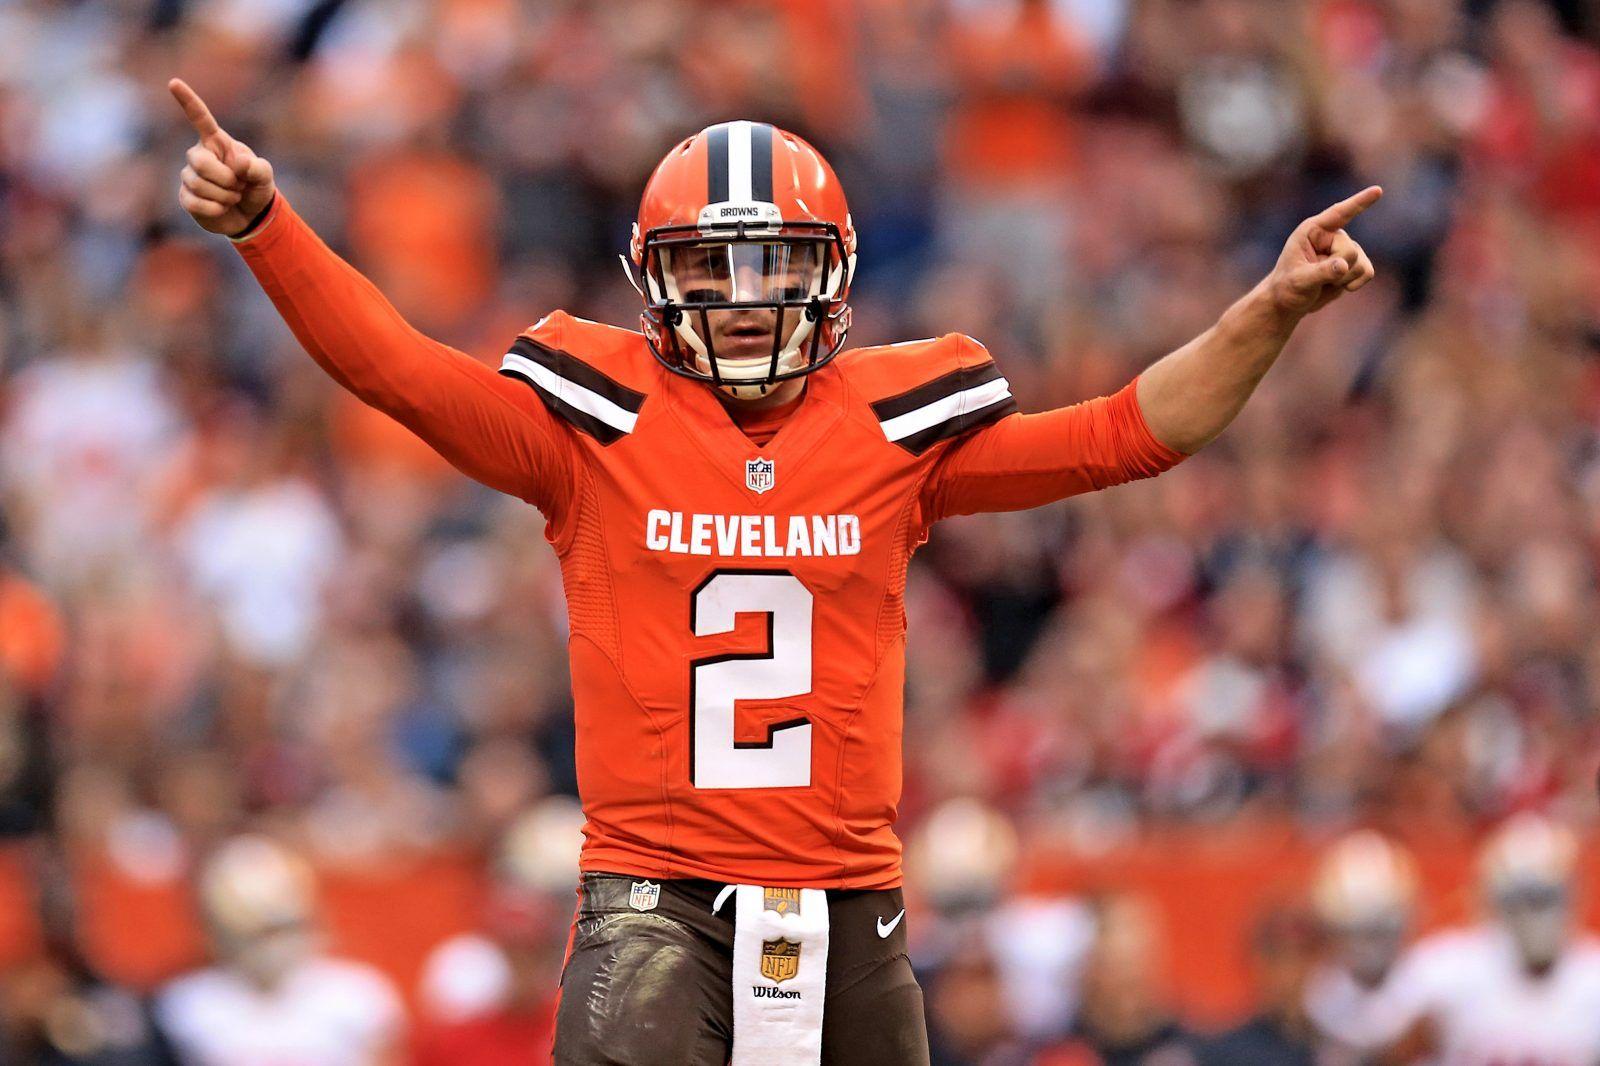 Johnny Manziel's Short Rise and Long Fall